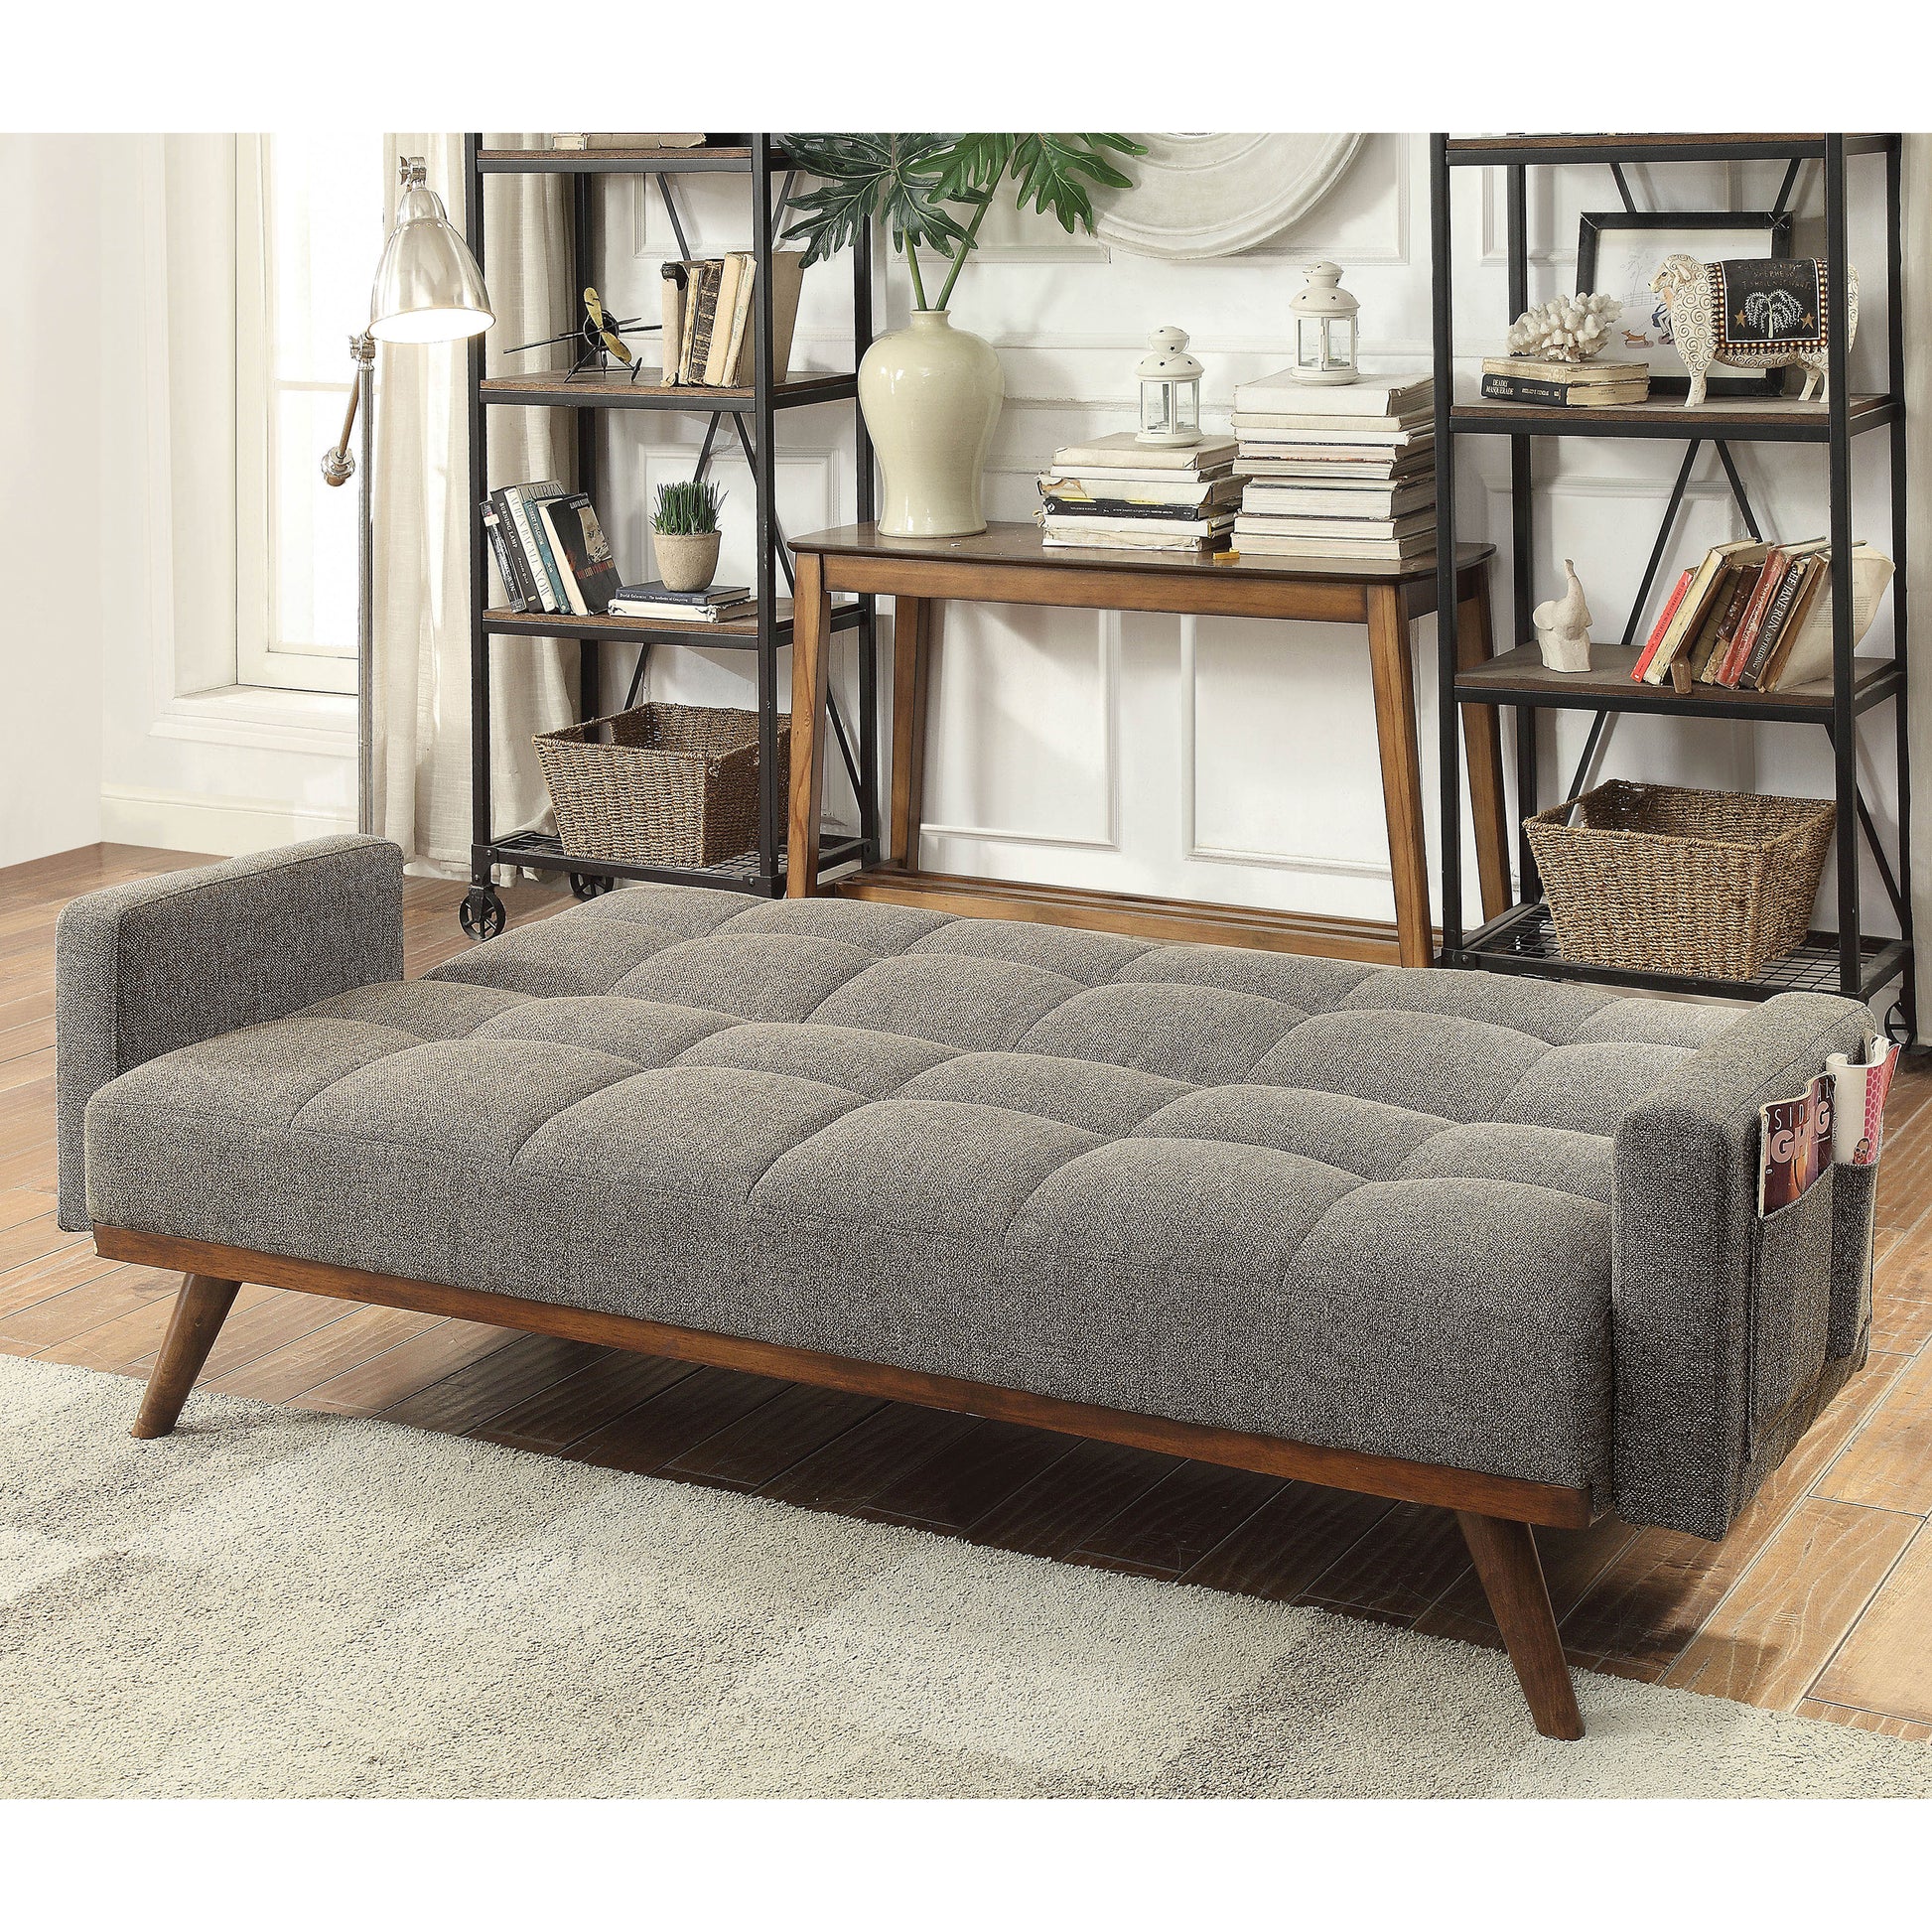 Left angled mid-century modern gray tufted futon with a wood base laid flat in a living area with accessories